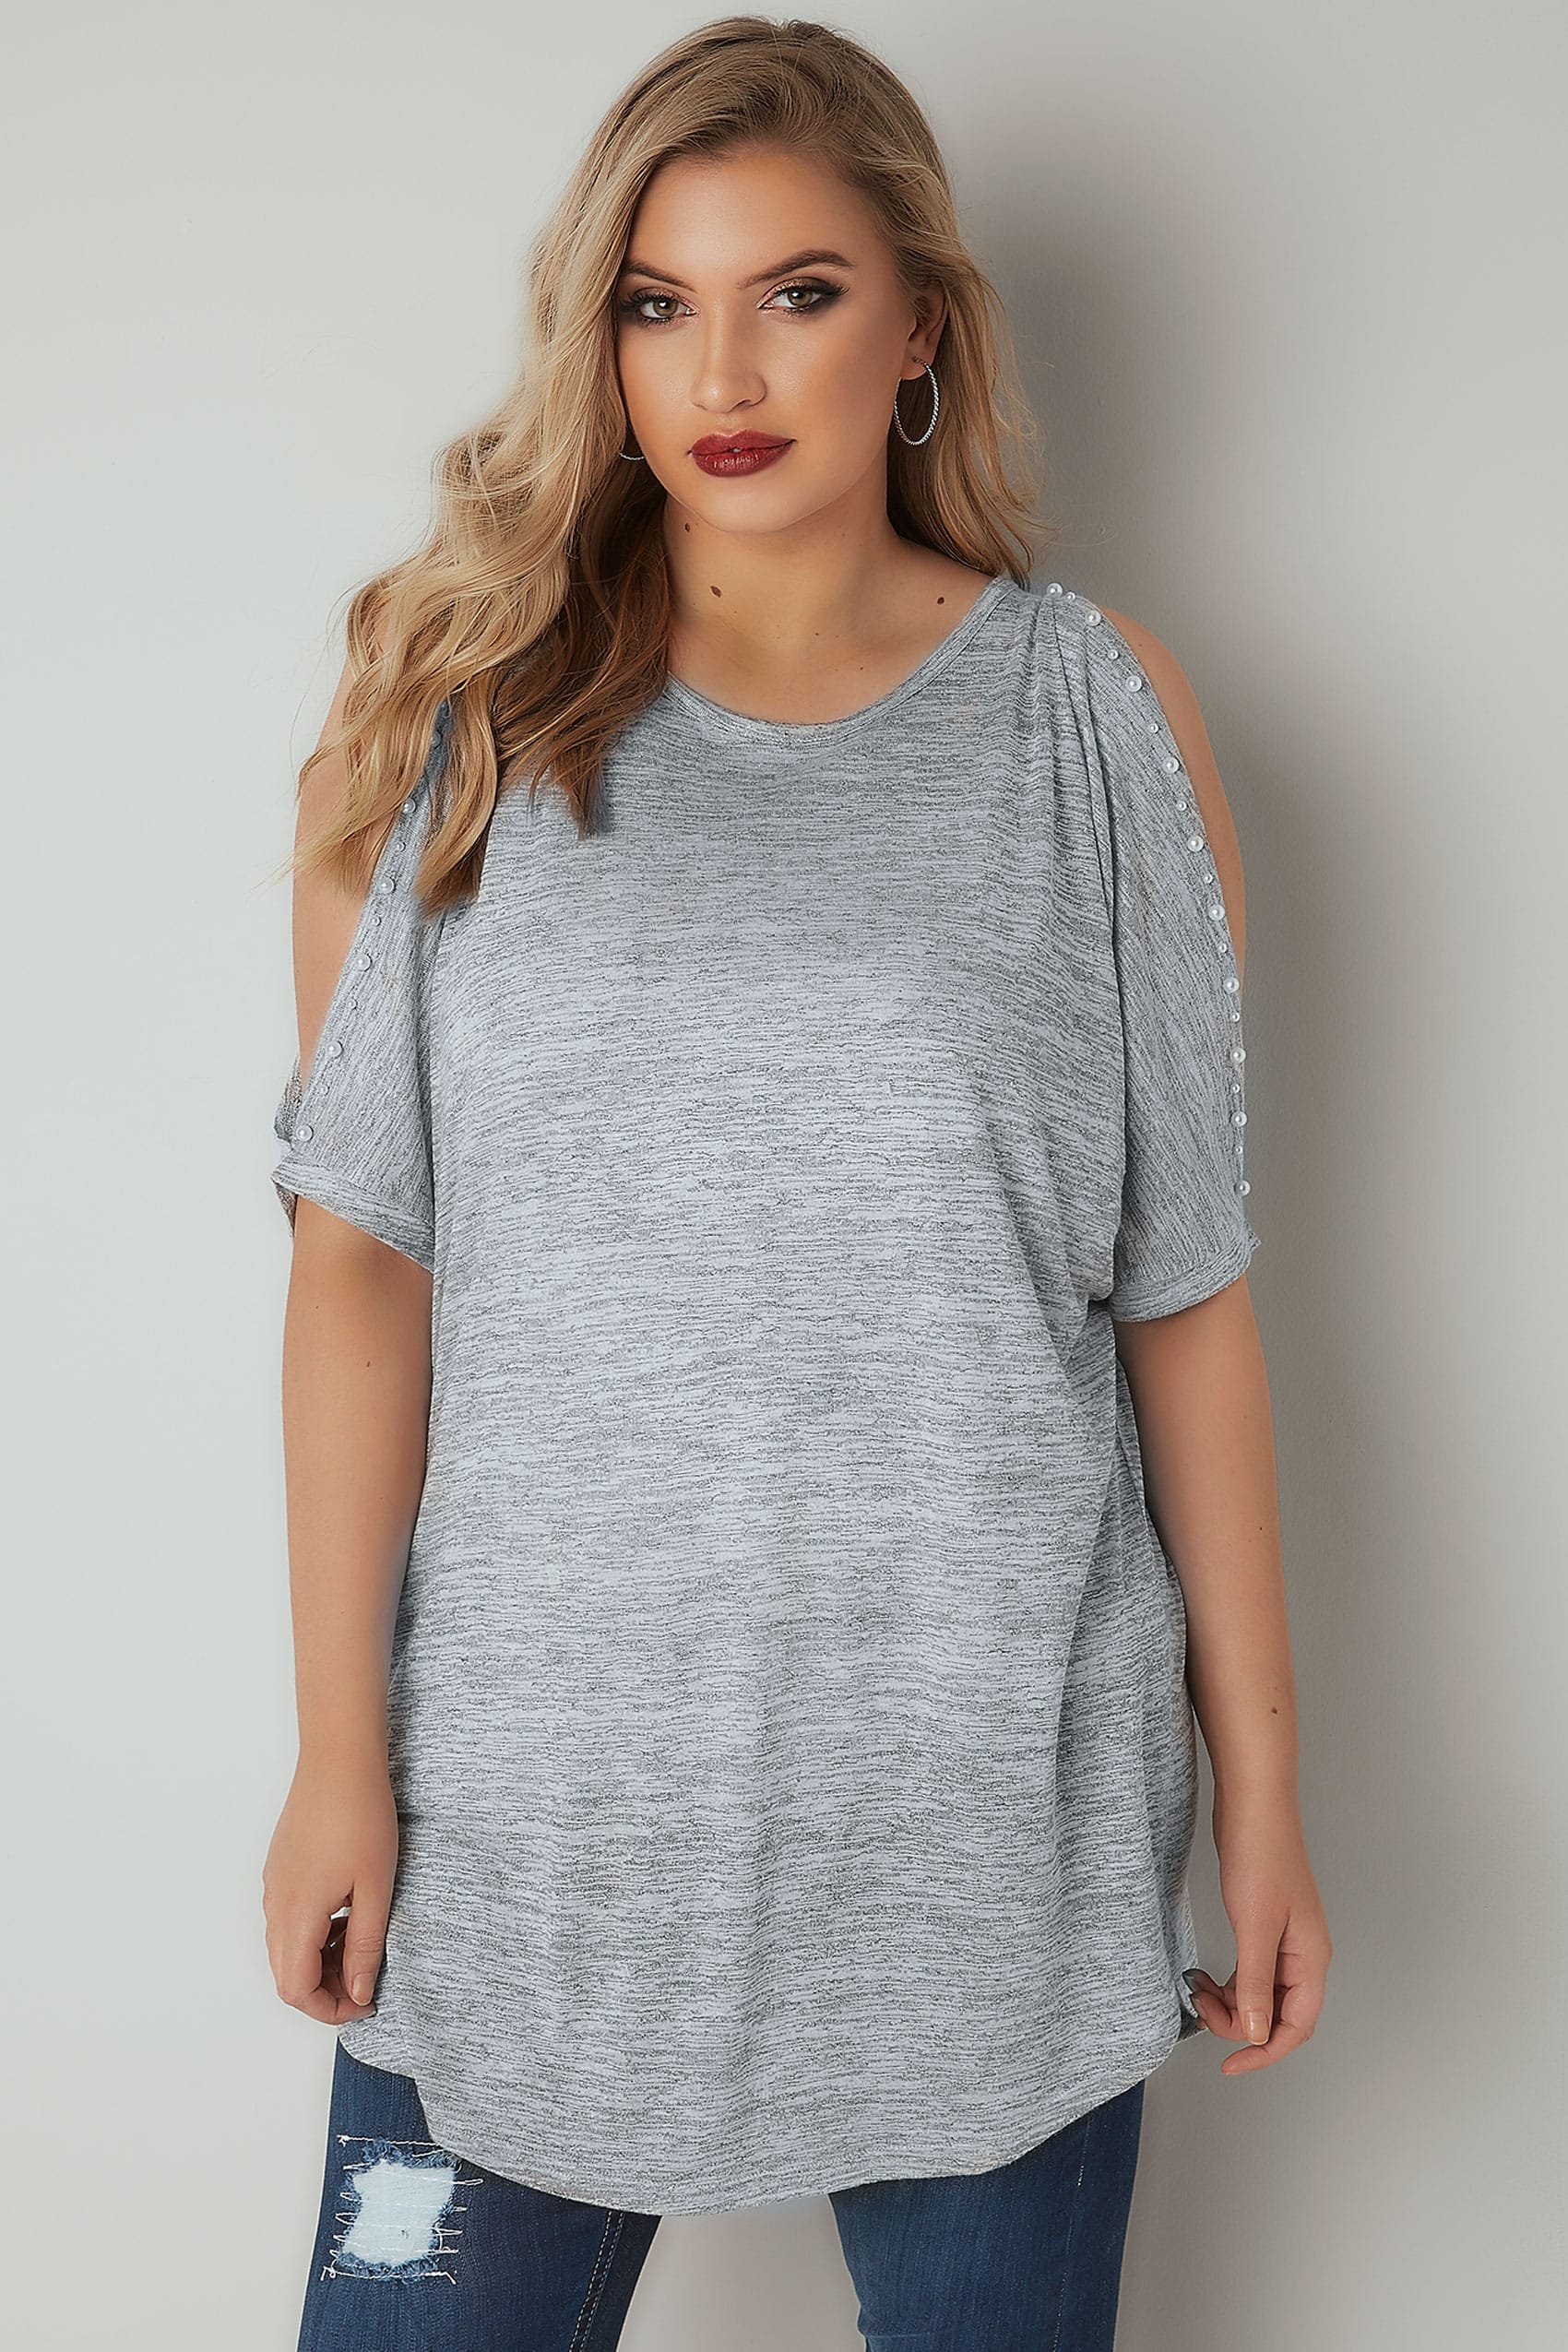 Grey Pearl Embellished Top With Split Sleeves, Plus size 16 to 36